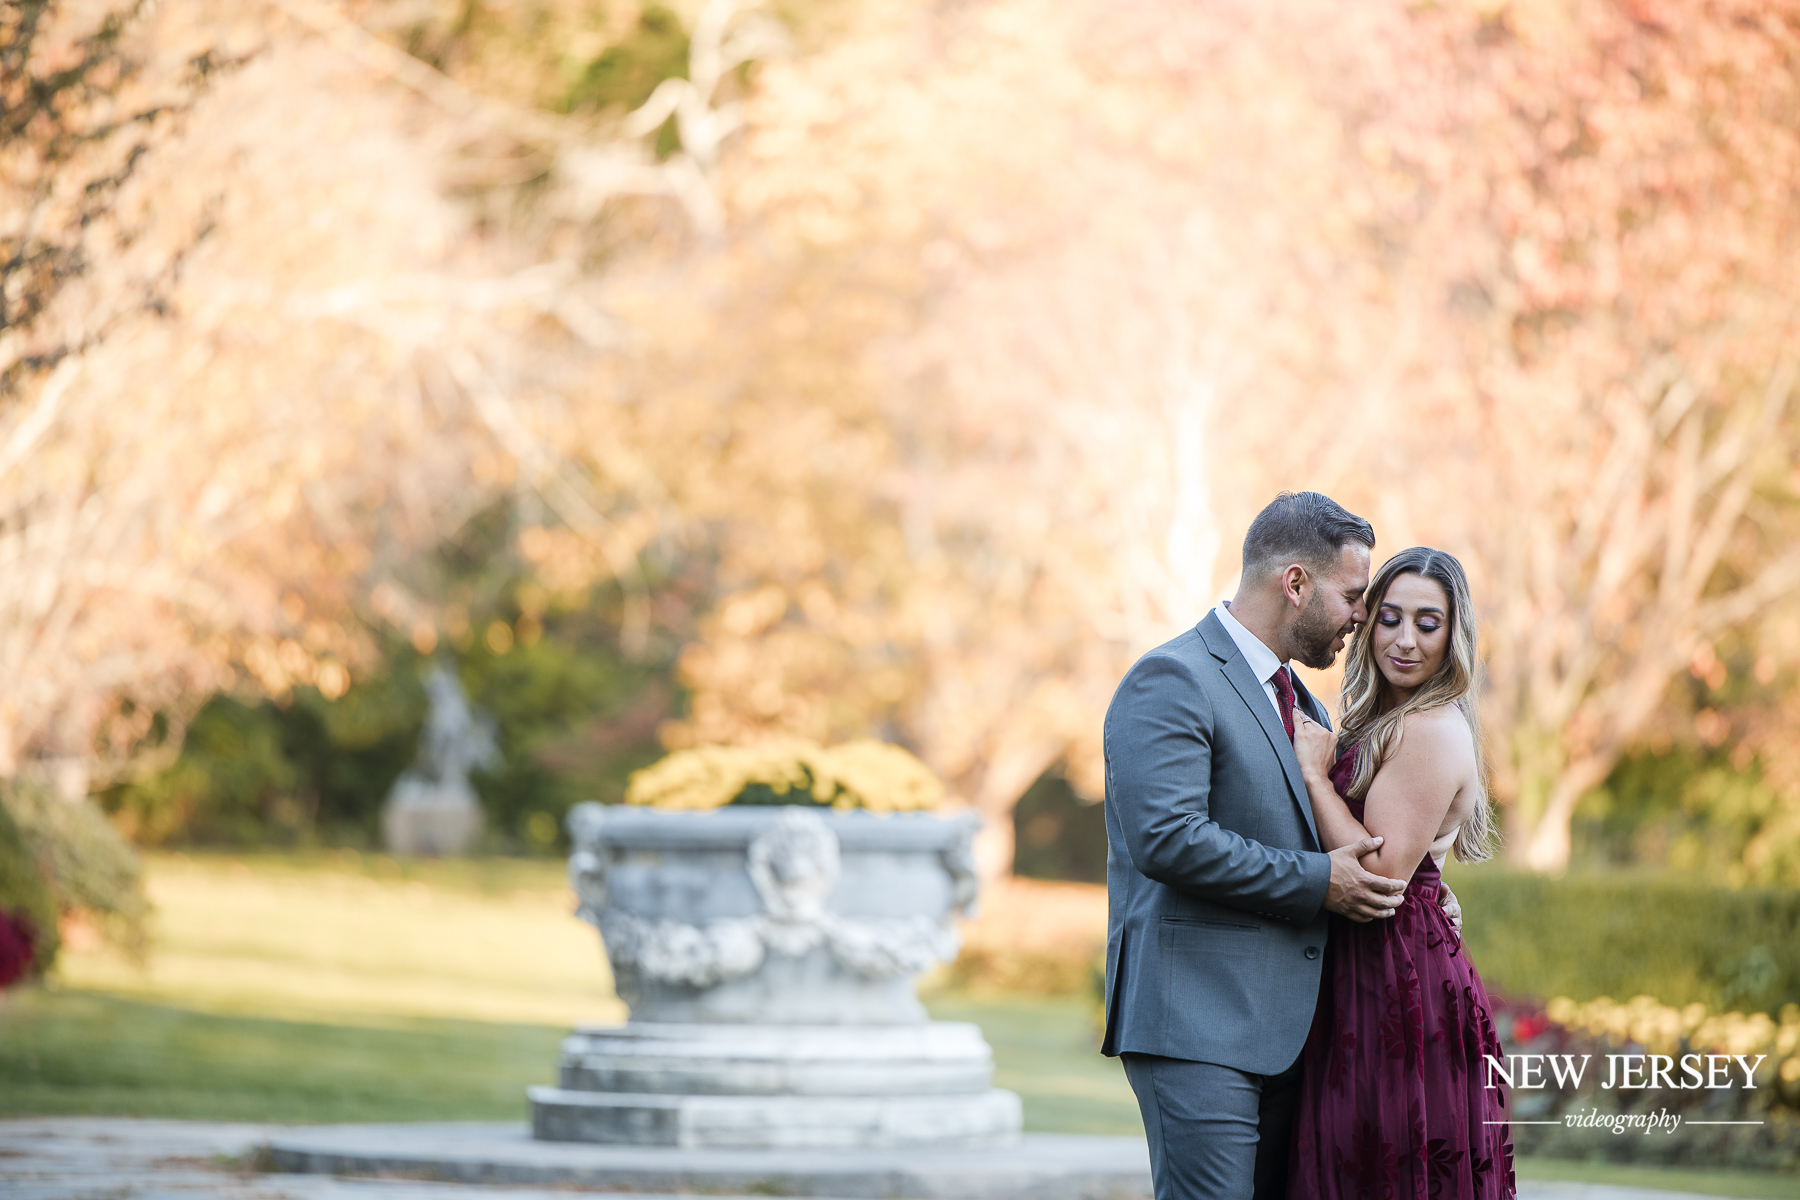 Stunning Engagement Photo Outfits from a New Jersey Photographer